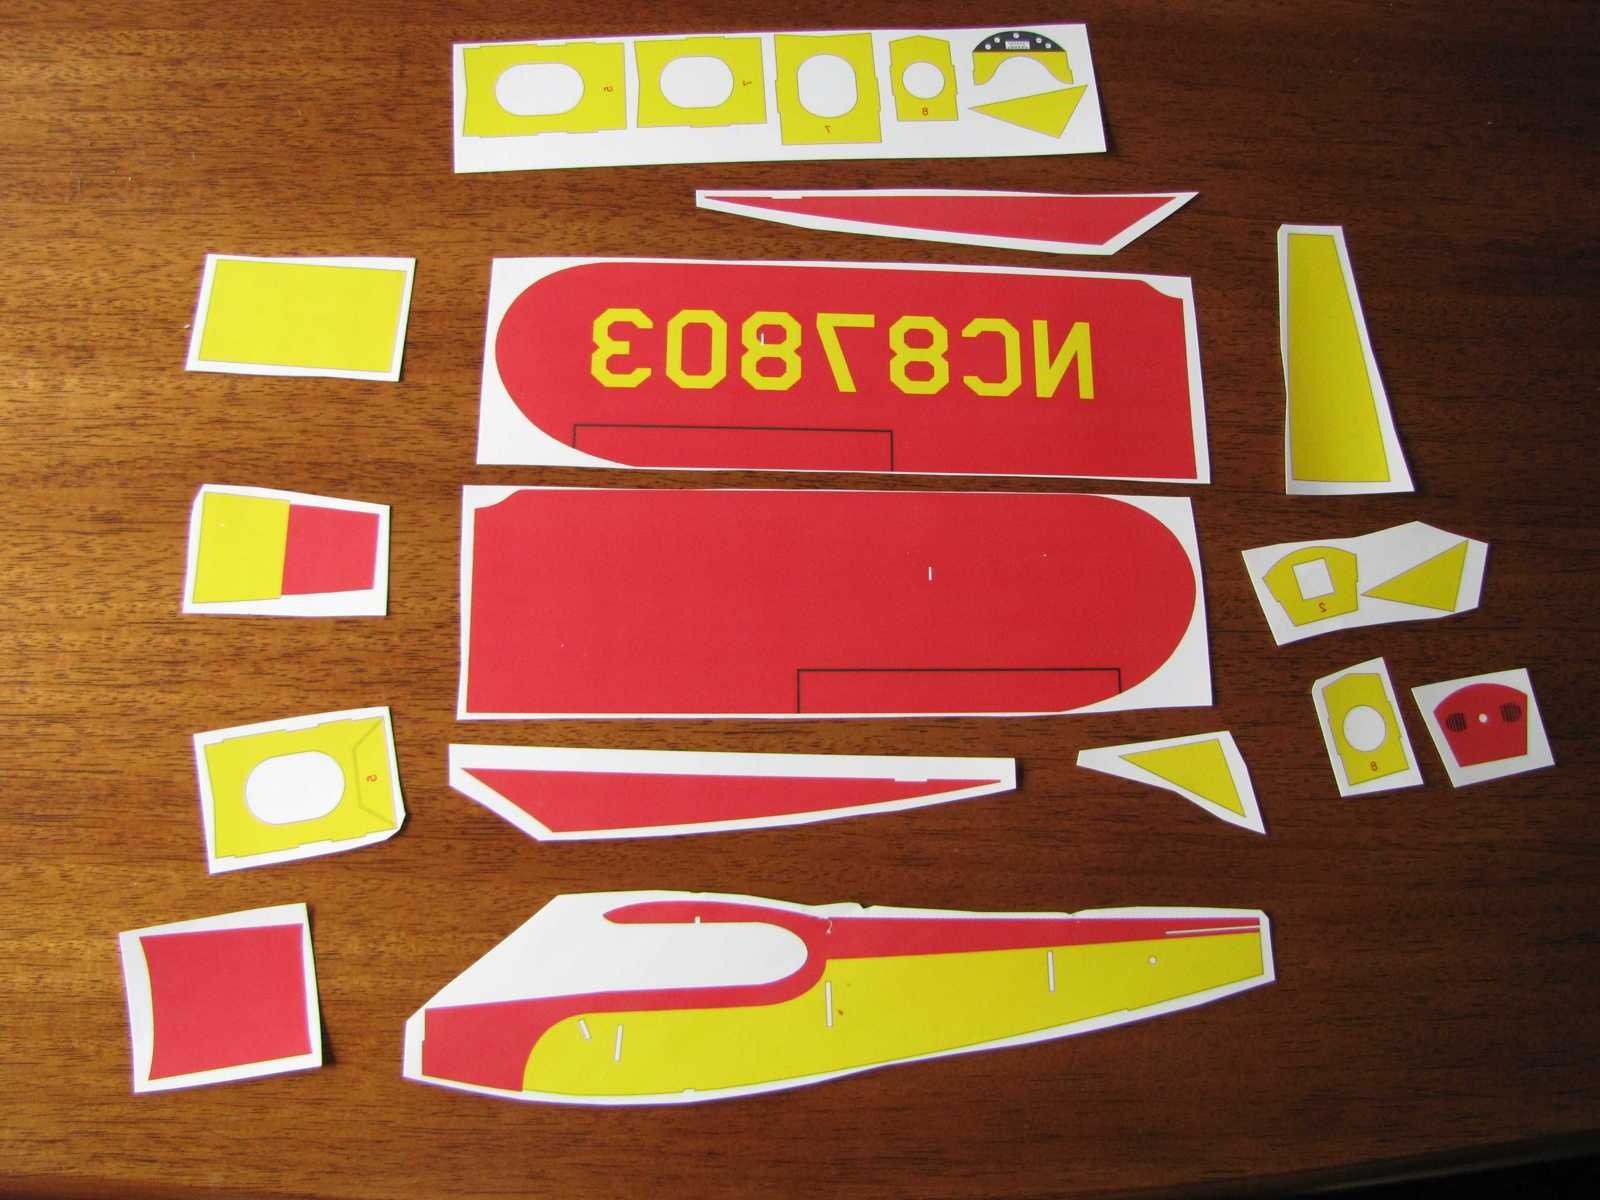 Depending on how you laid out your artwork to fit a letter size sheet, it may be necessary to cut the individual parts from the printed transfer paper. The parts do not need to be cut on the lines, just separated from the sheet of paper. If you had to break a part into sections, the sections can now be tapped together in preparation for transfer to the balsa sheet.